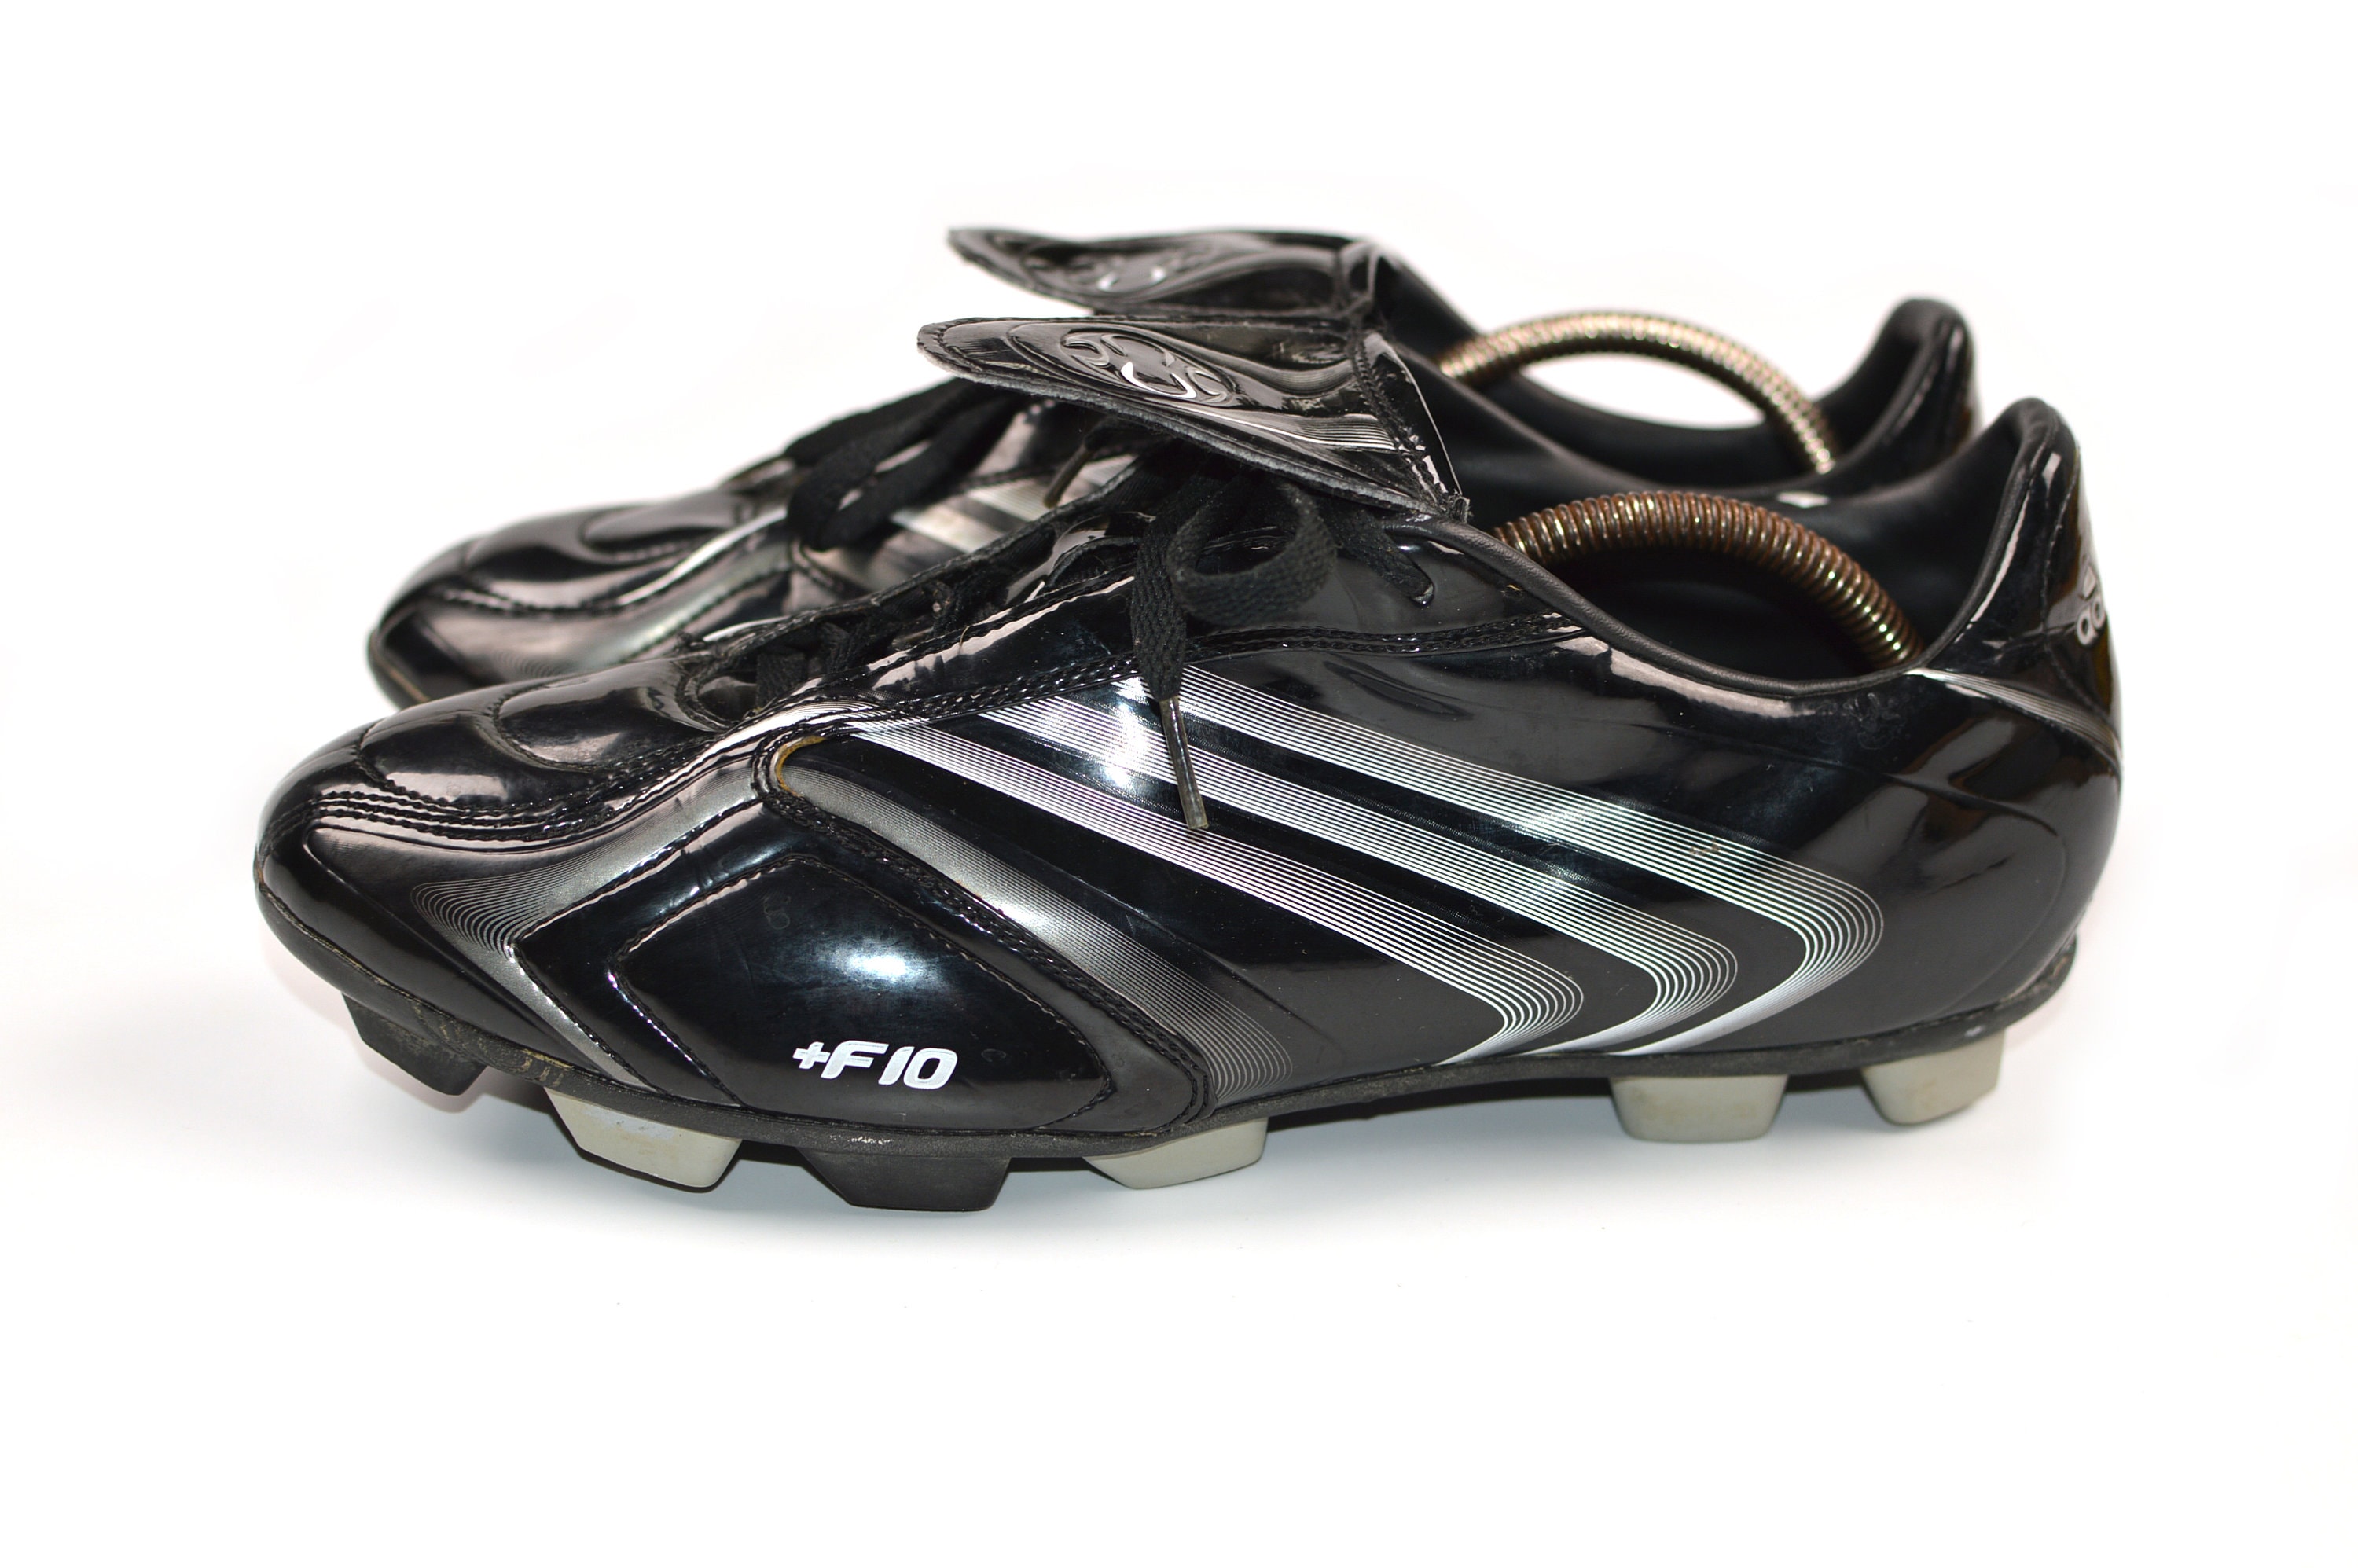 Rare Adidas F10 2005 Black Soccer Boots Shoes 749228 - Etsy